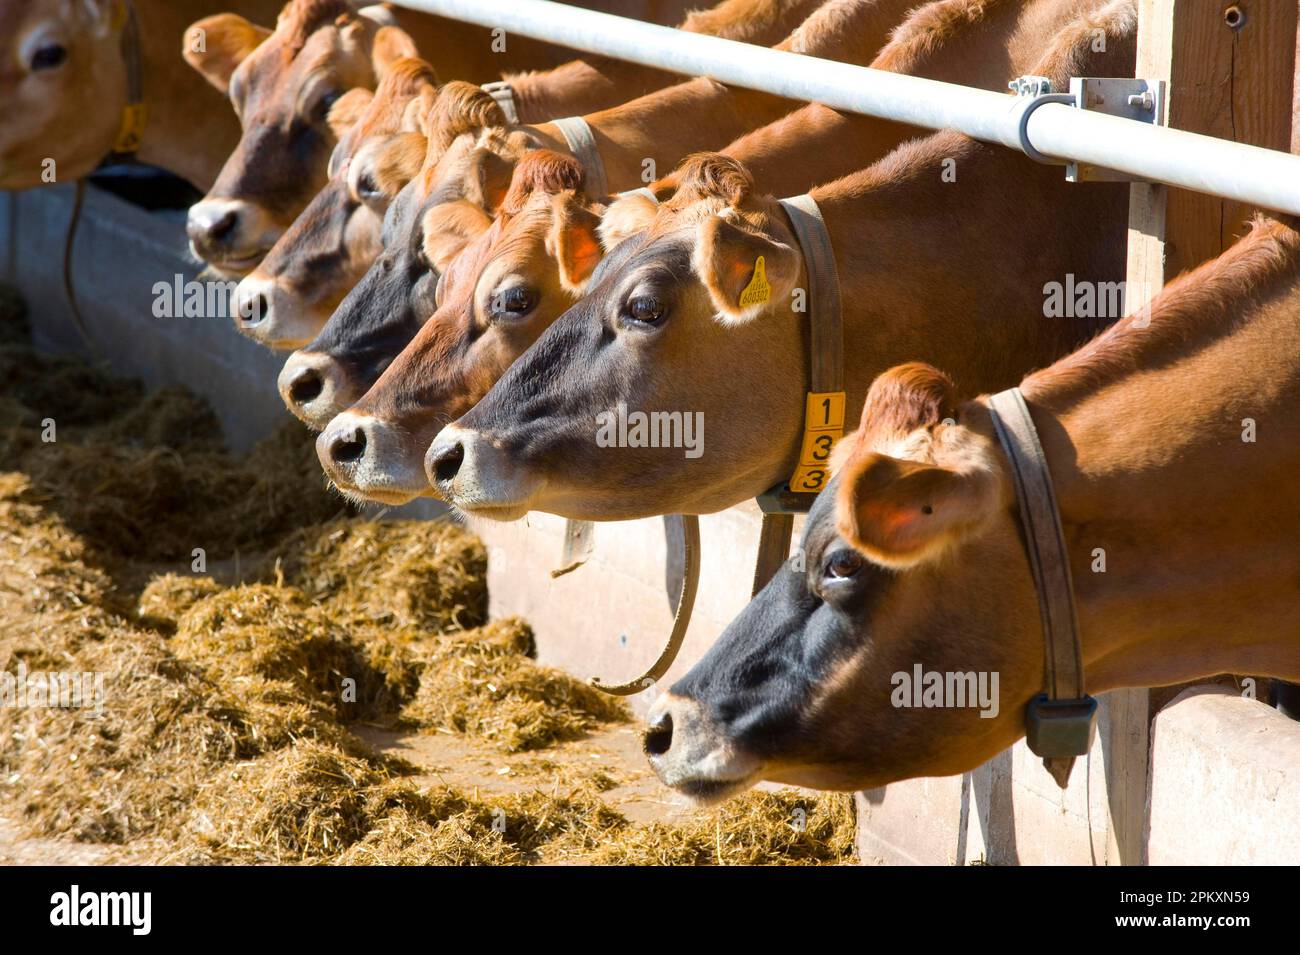 Domestic cattle, Jersey cows, herd at feed barrier, feeding with silage, total mixed ration (TMR), England, Great Britain Stock Photo